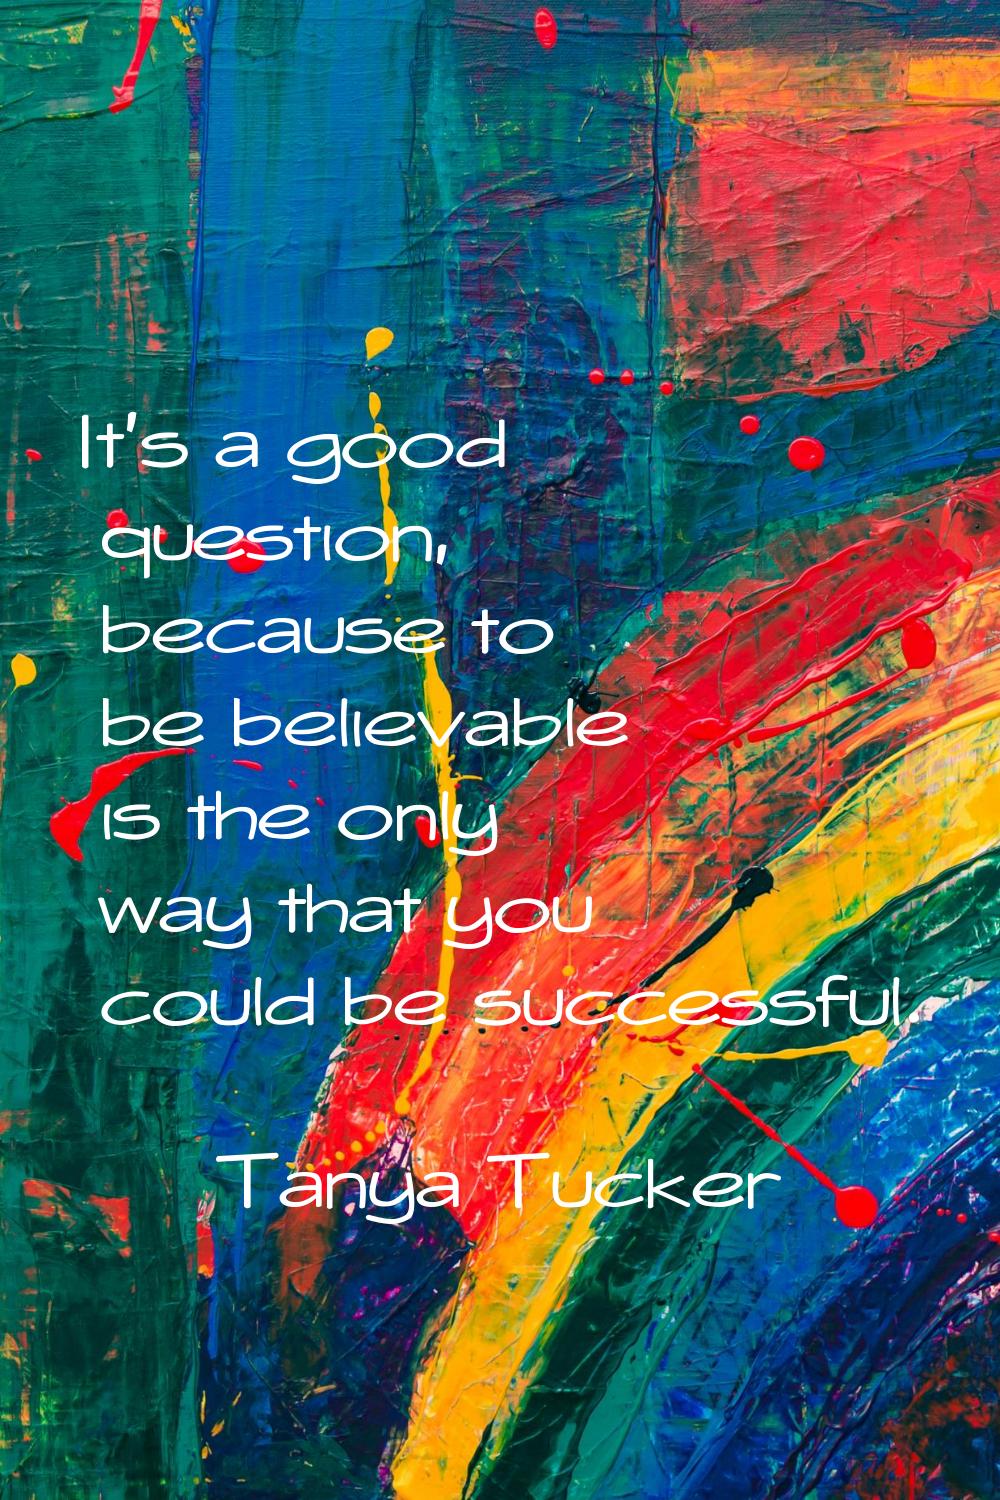 It's a good question, because to be believable is the only way that you could be successful.